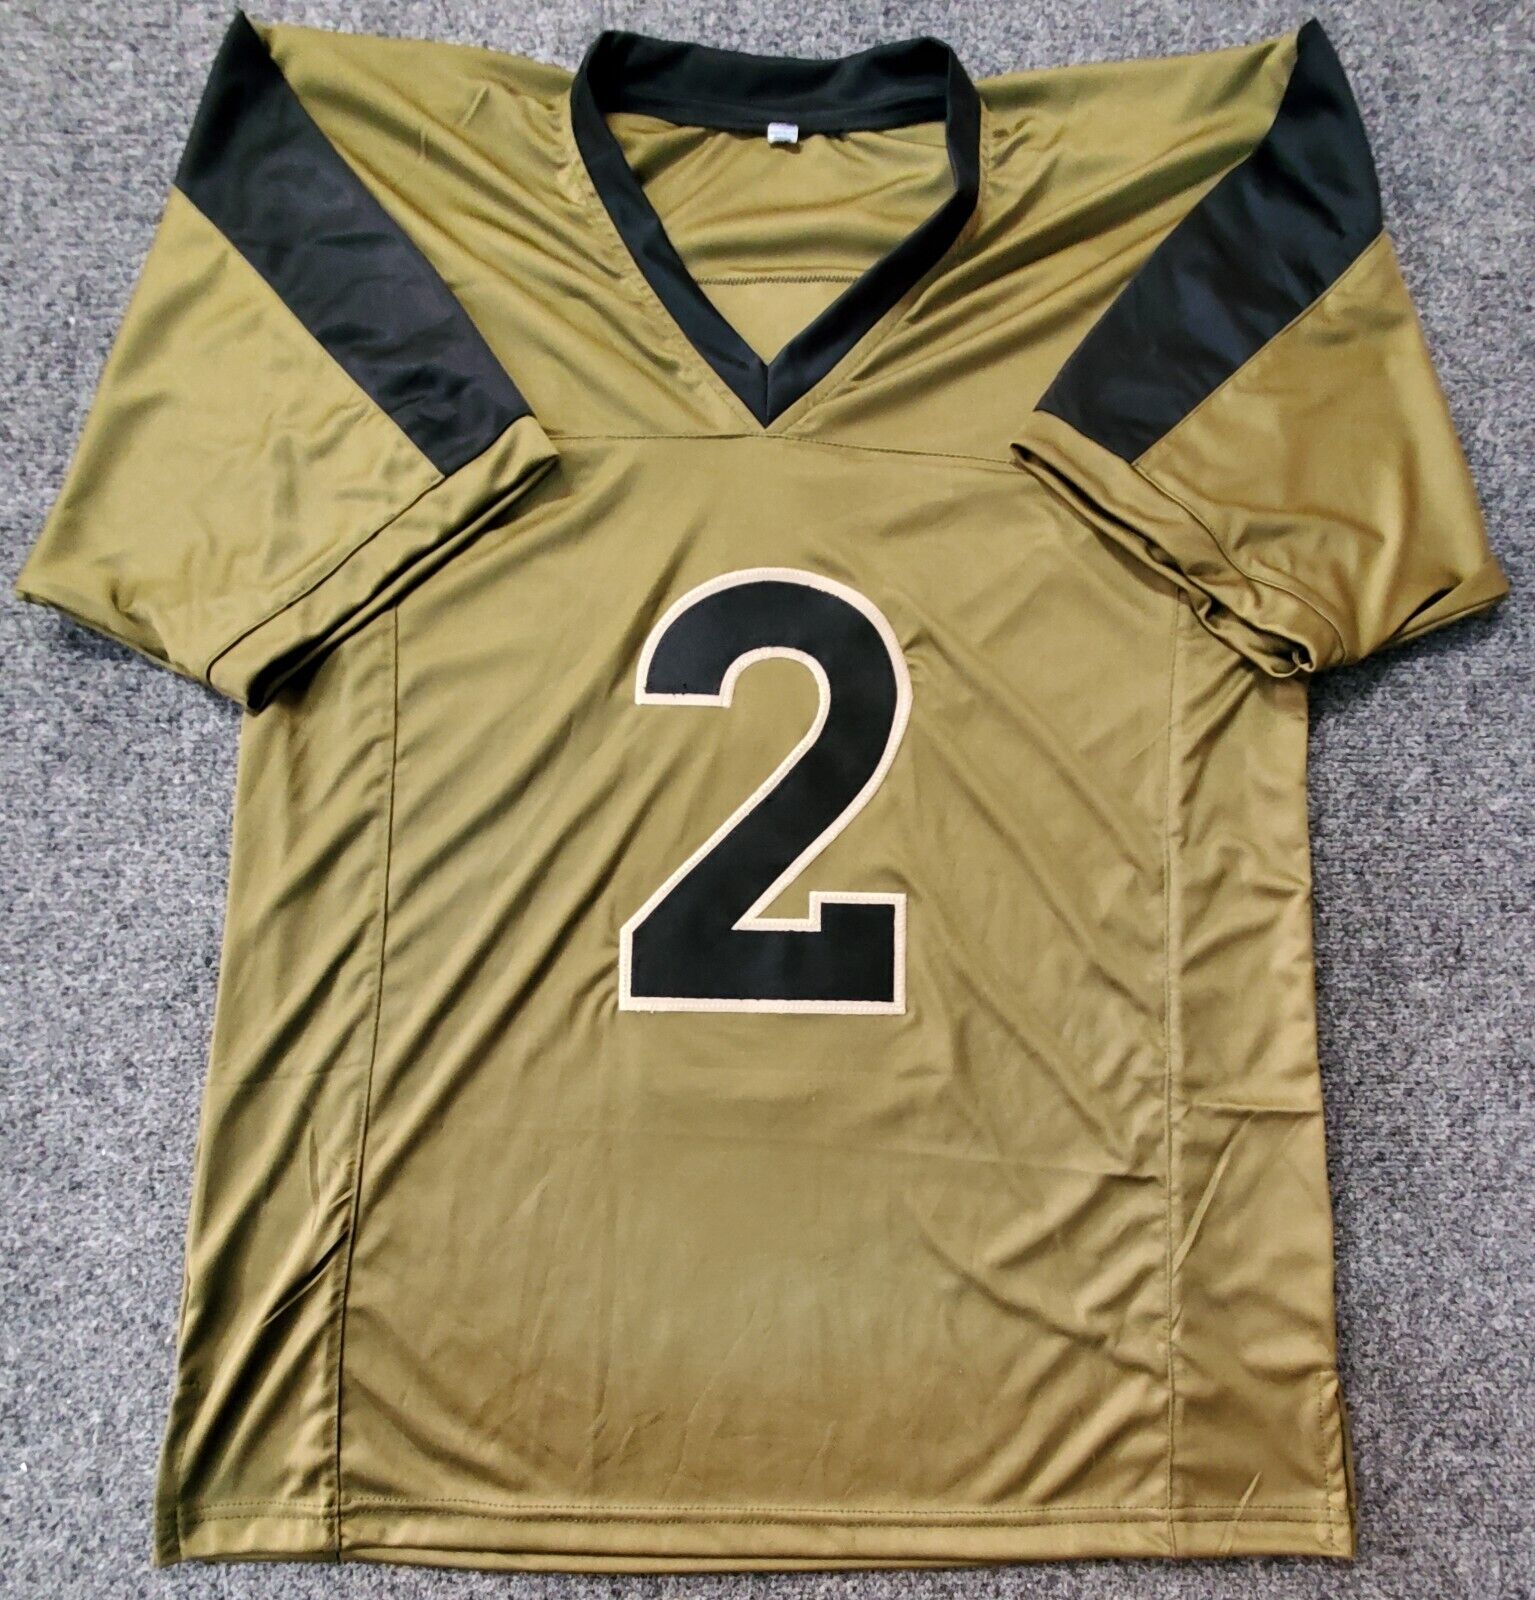 brown and yellow broncos jersey